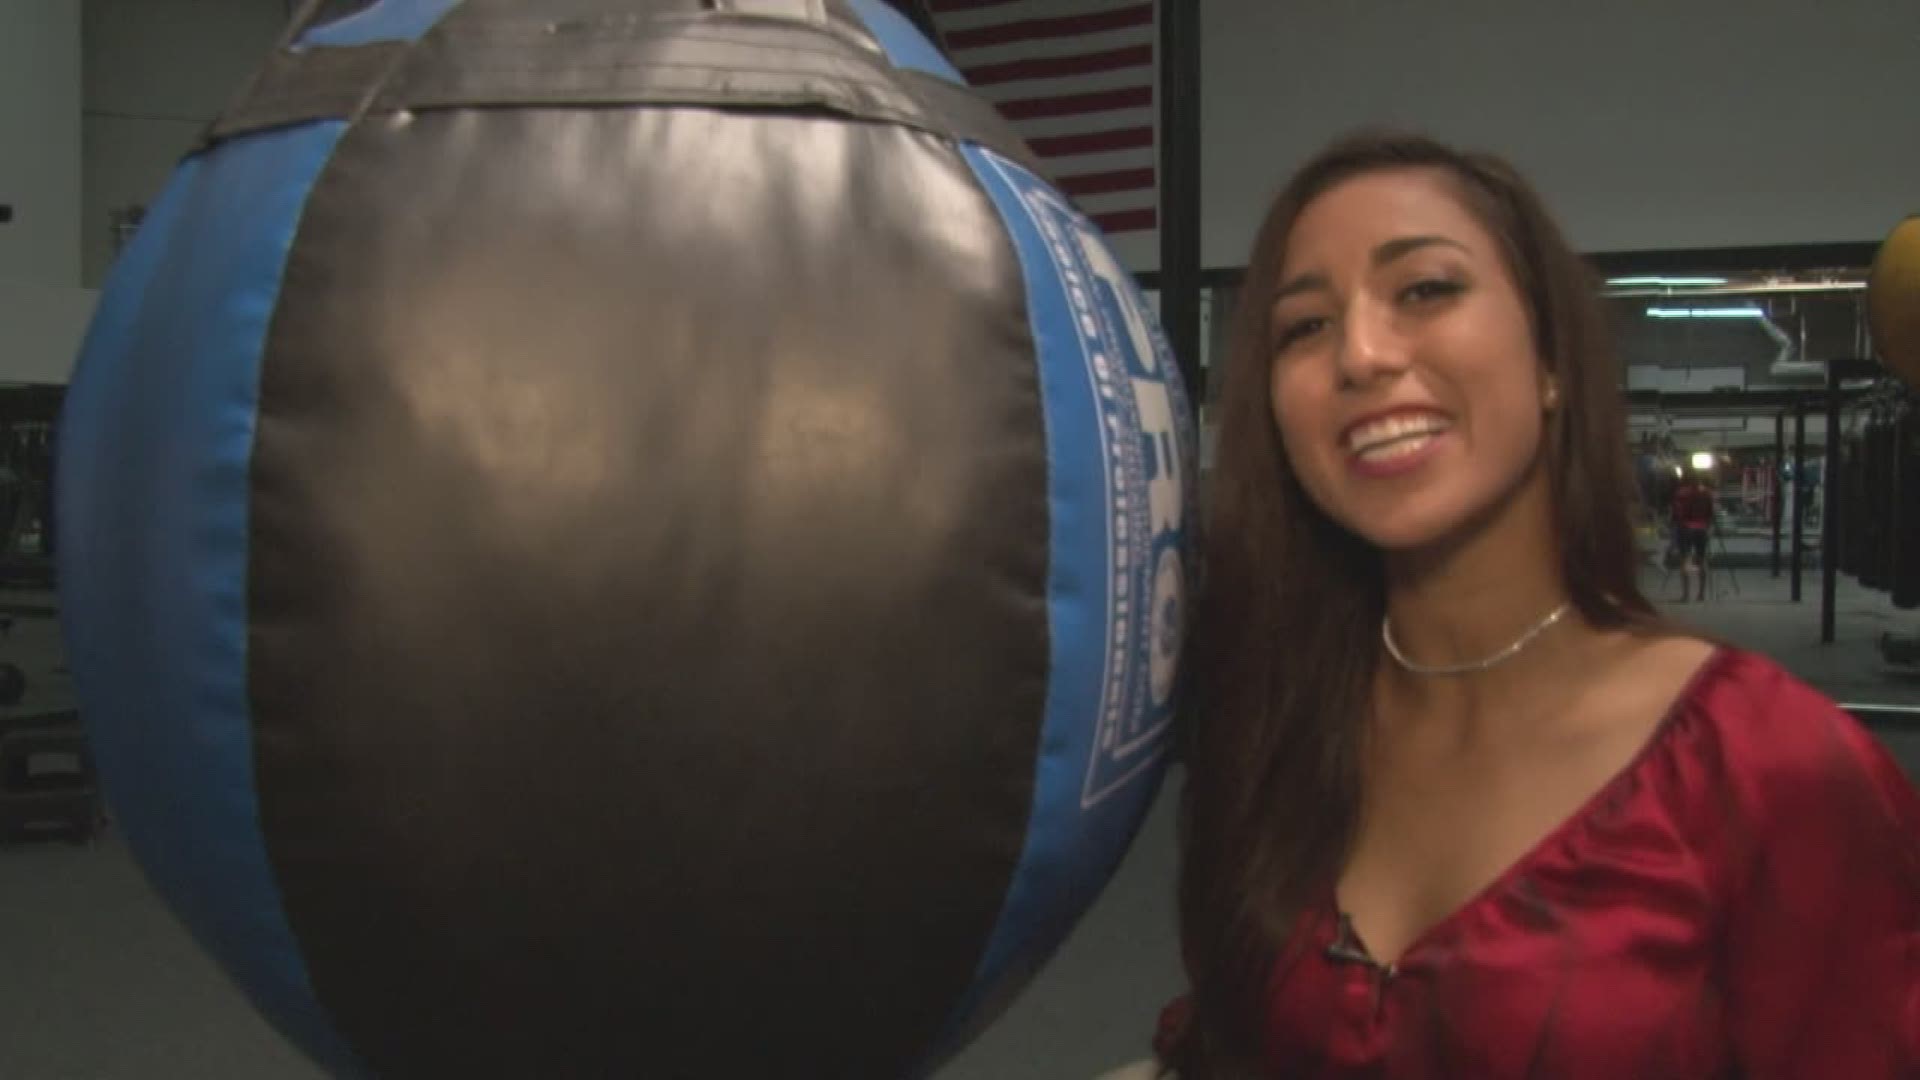 Top female boxer, 16-year-old, Lilly Keating is preparing for U.S. Junior Olympics, Youth Open and Prep National Championships this summer.